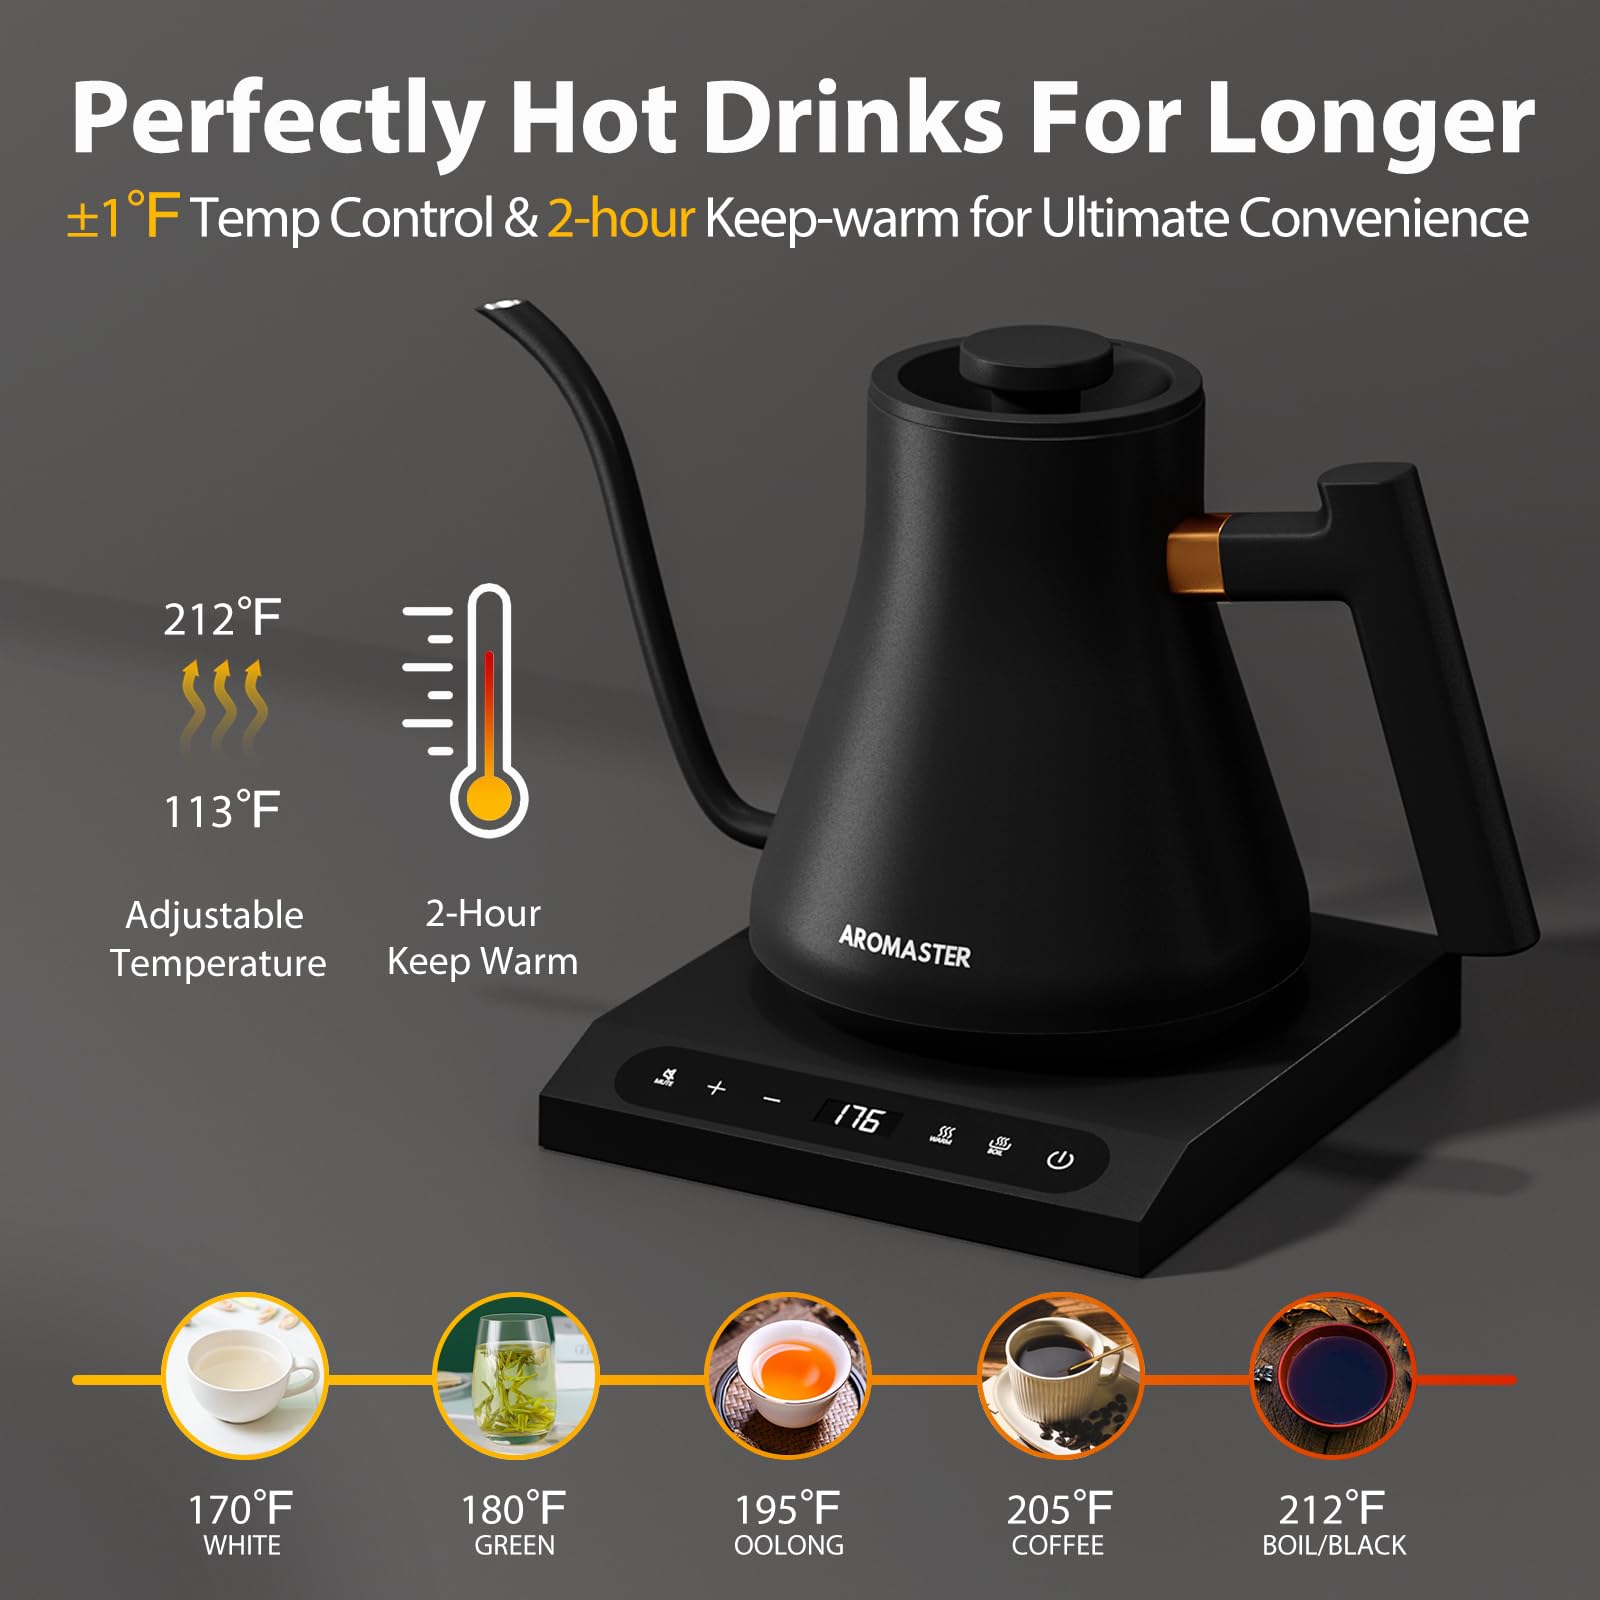 Gooseneck Kettle with Temperature Control, Aromaster Electric Coffee Tea Kettle,Stainless Steel,2H Keep Warm,1200 Watt Quick Heating Electric Tea Pot for Family,Auto Shut-Off,0.9L Black